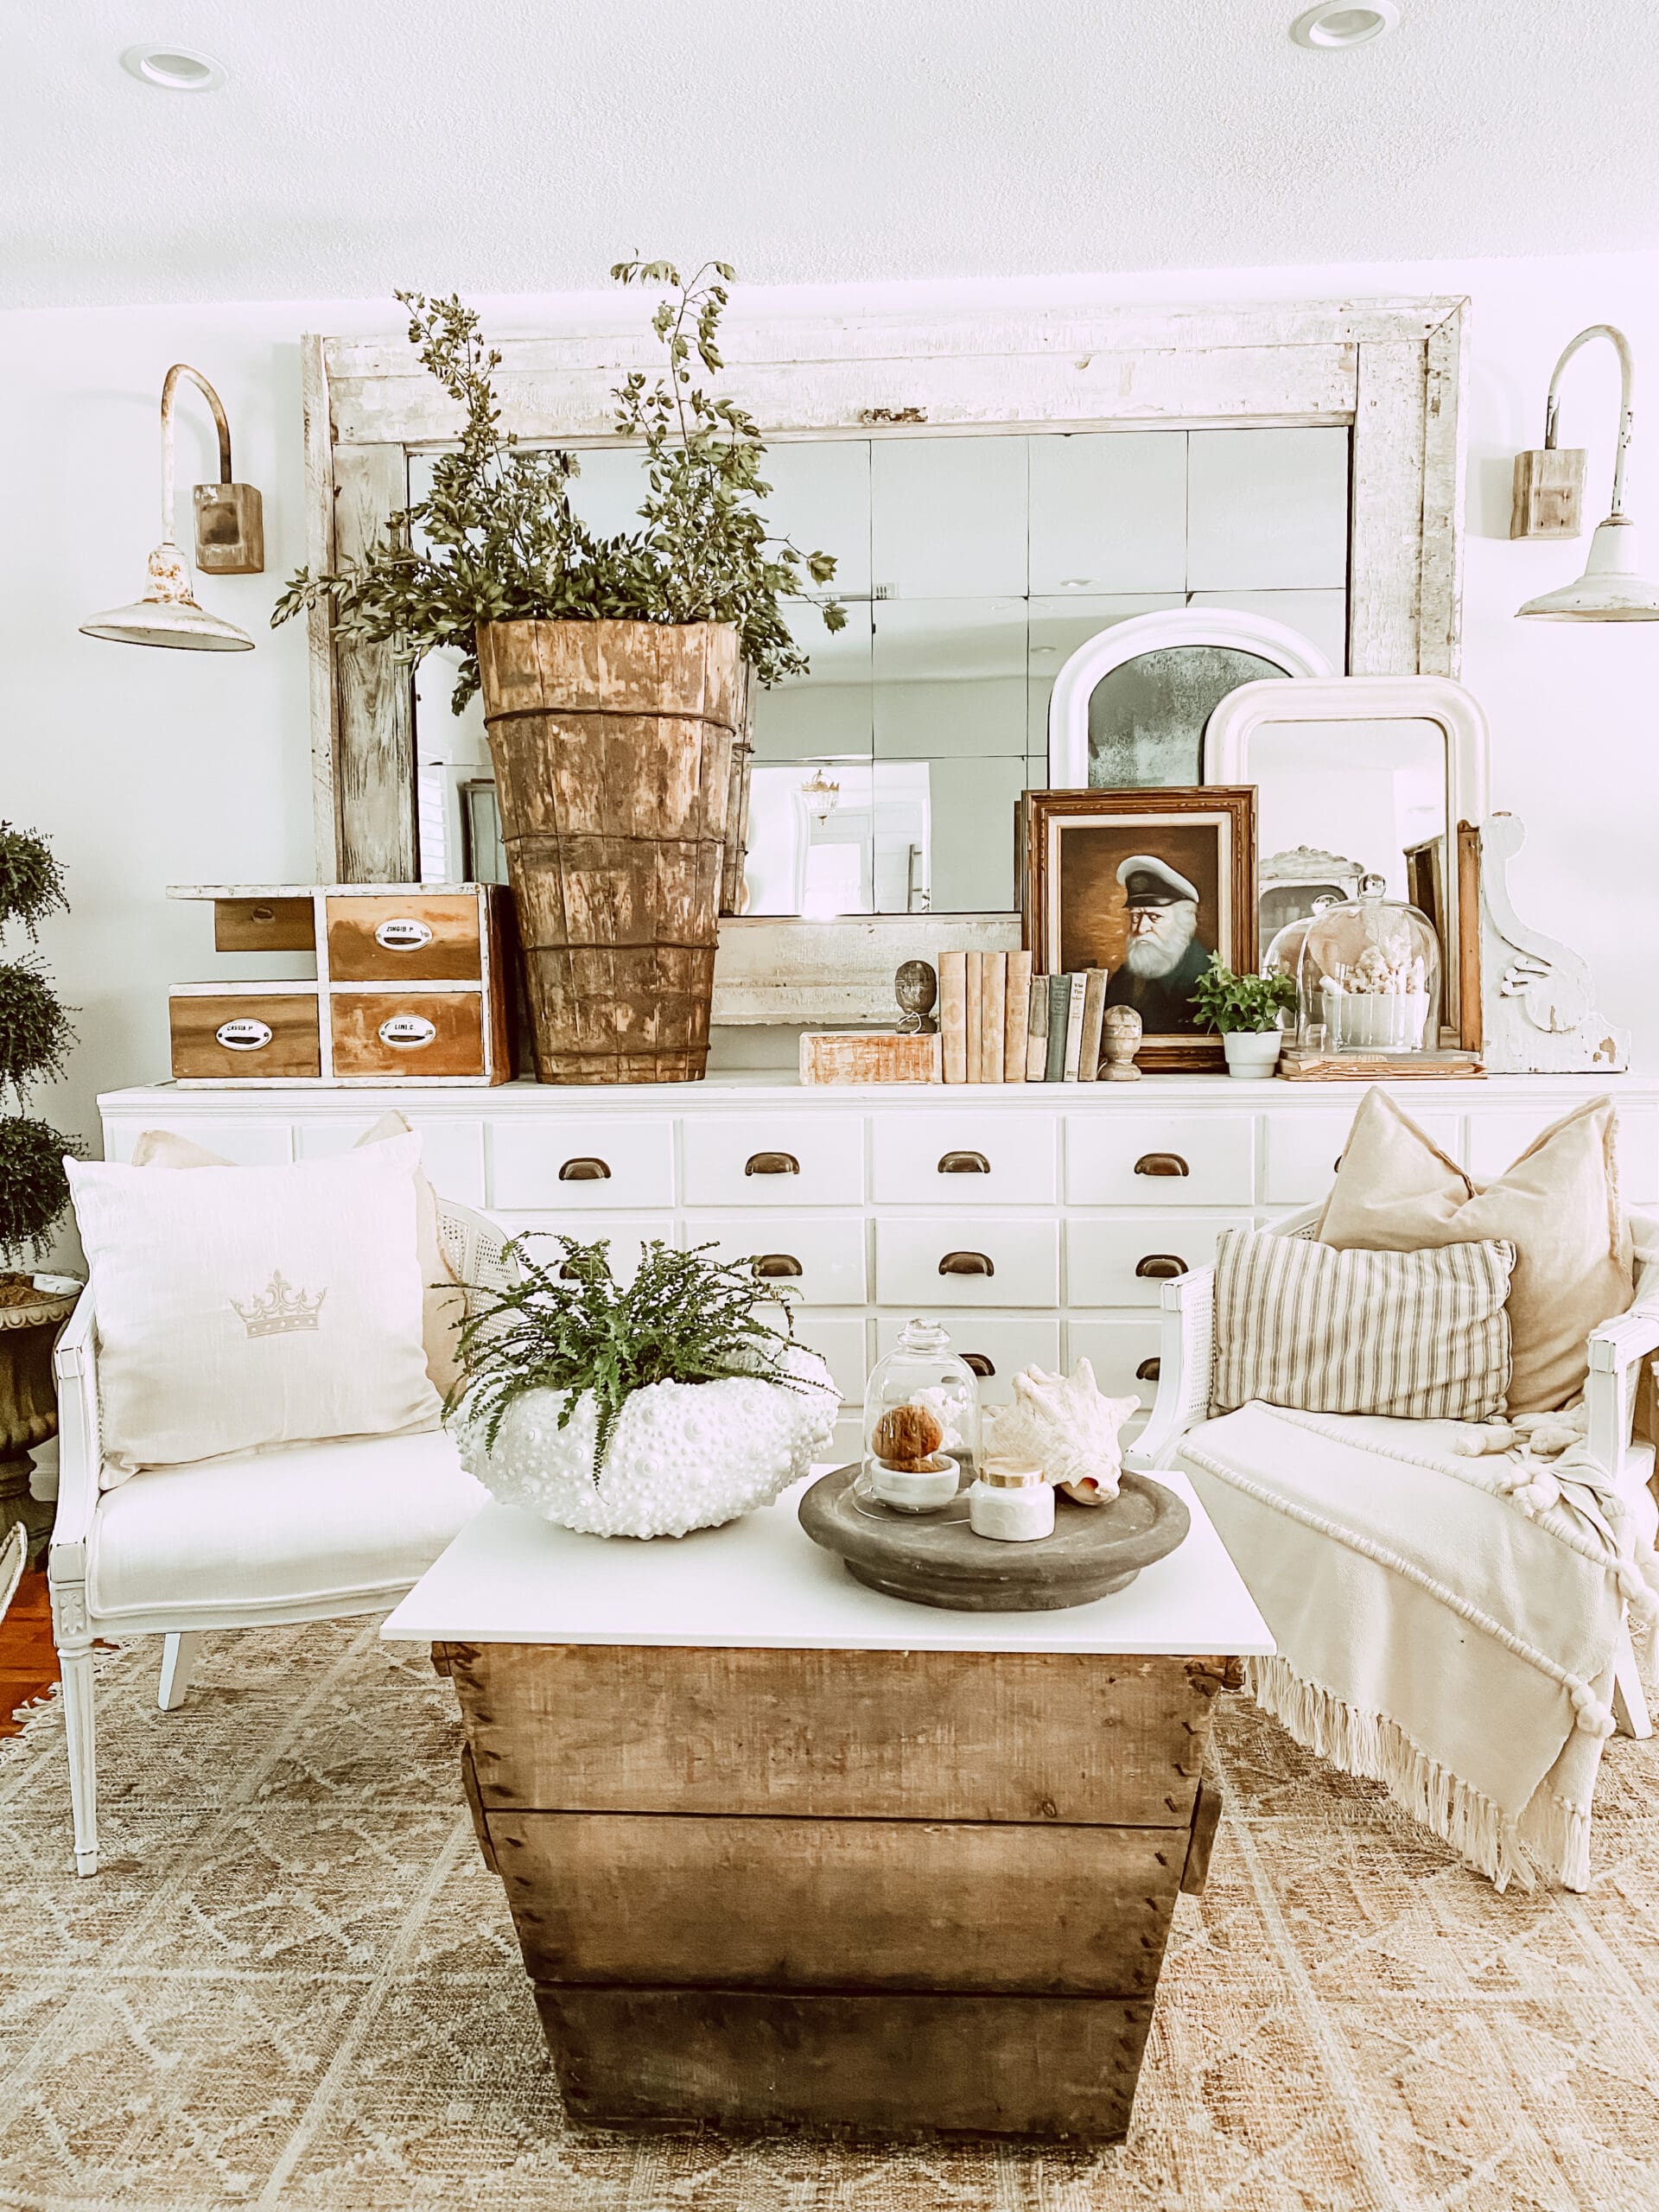 Ideas for Beach House Decor on a Thrift Store Budget